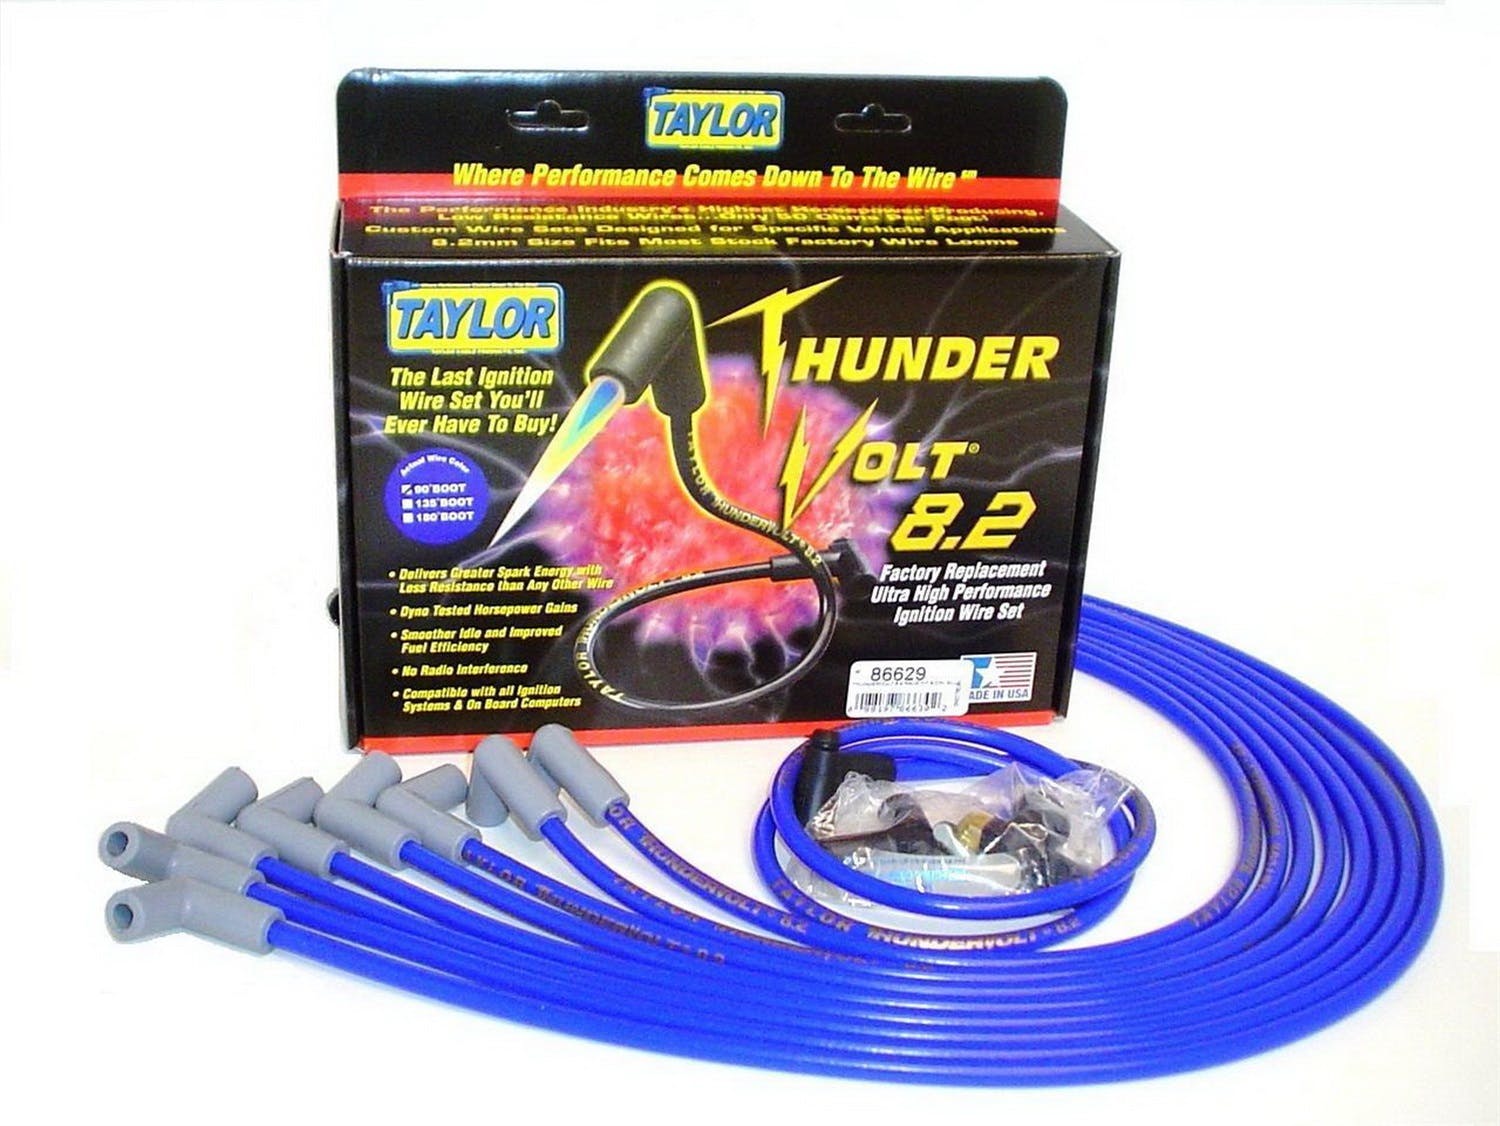 Taylor Cable Products 86629 Thundervolt 8.2 race fit 8 cyl blue